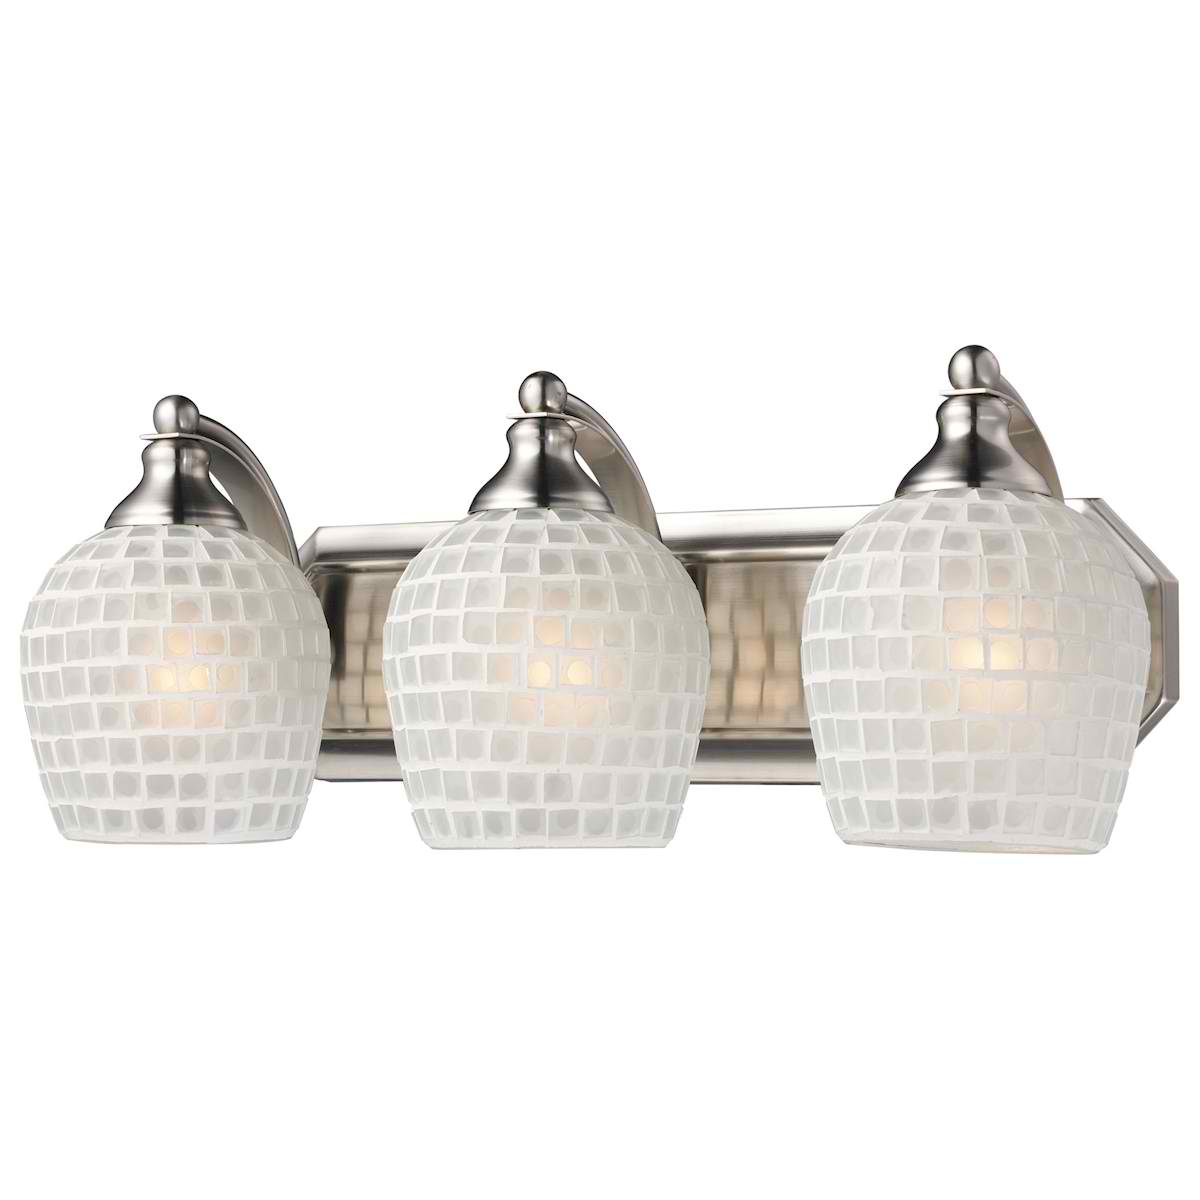 Vanity 3 Light in Satin Nickel with White Glass